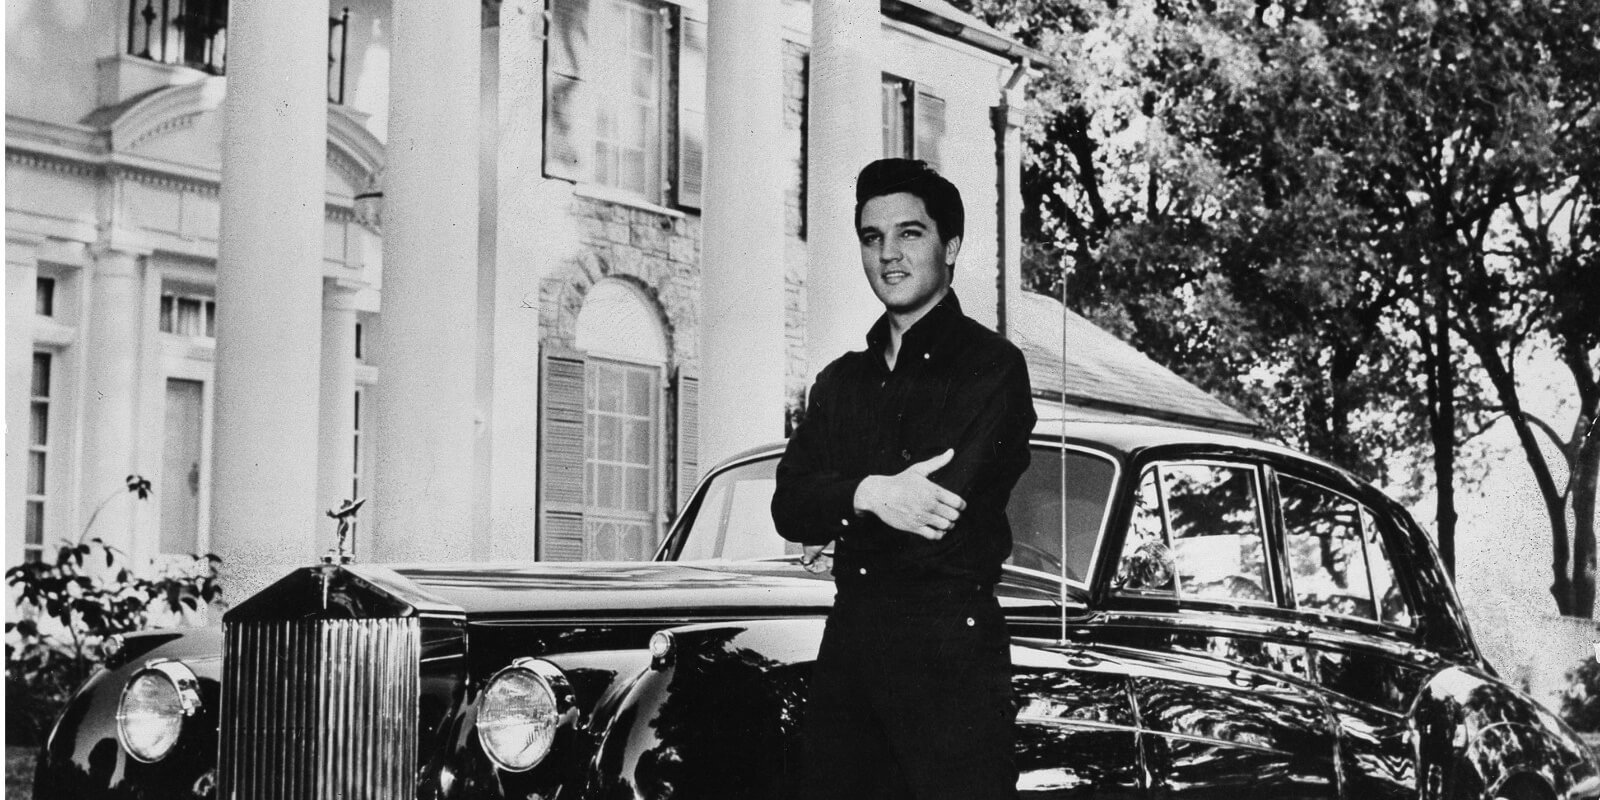 Elvis Presley stands outside of his home, Graceland, located in Memphis, TN.